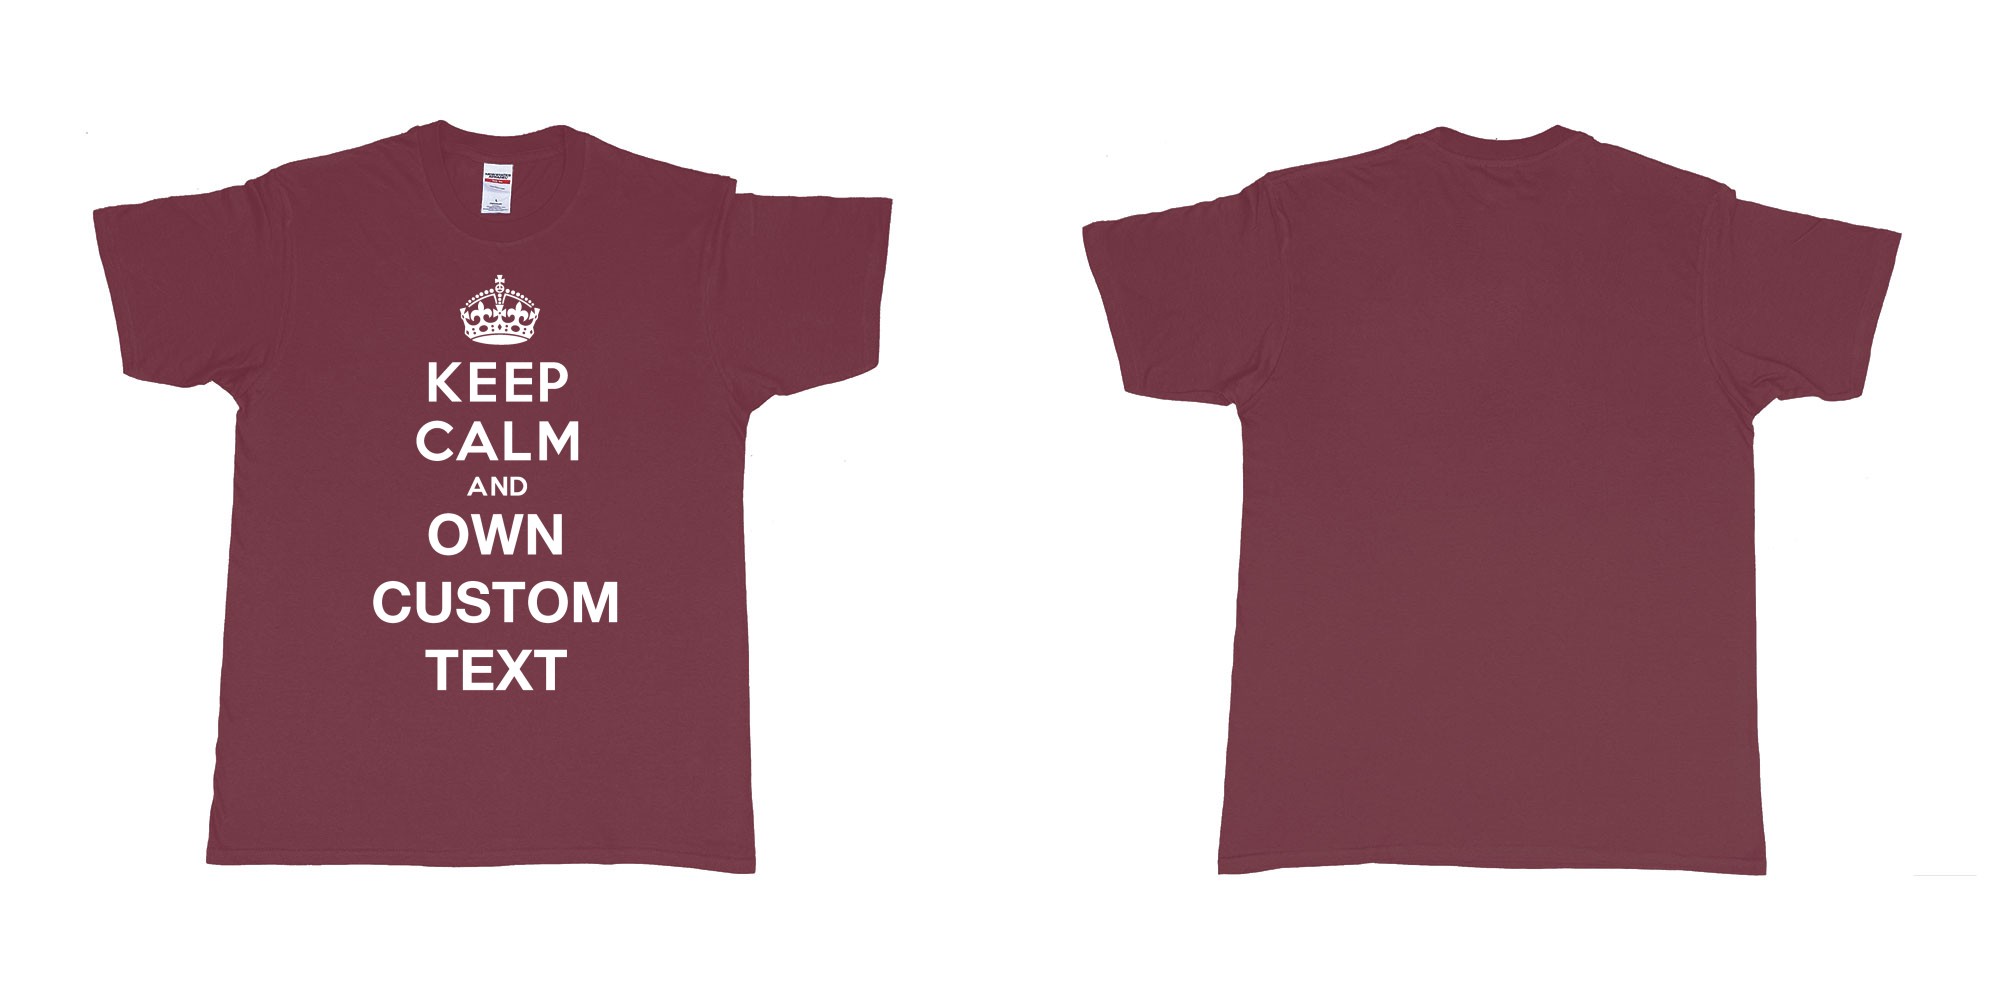 Custom tshirt design Keep Calm And in fabric color marron choice your own text made in Bali by The Pirate Way